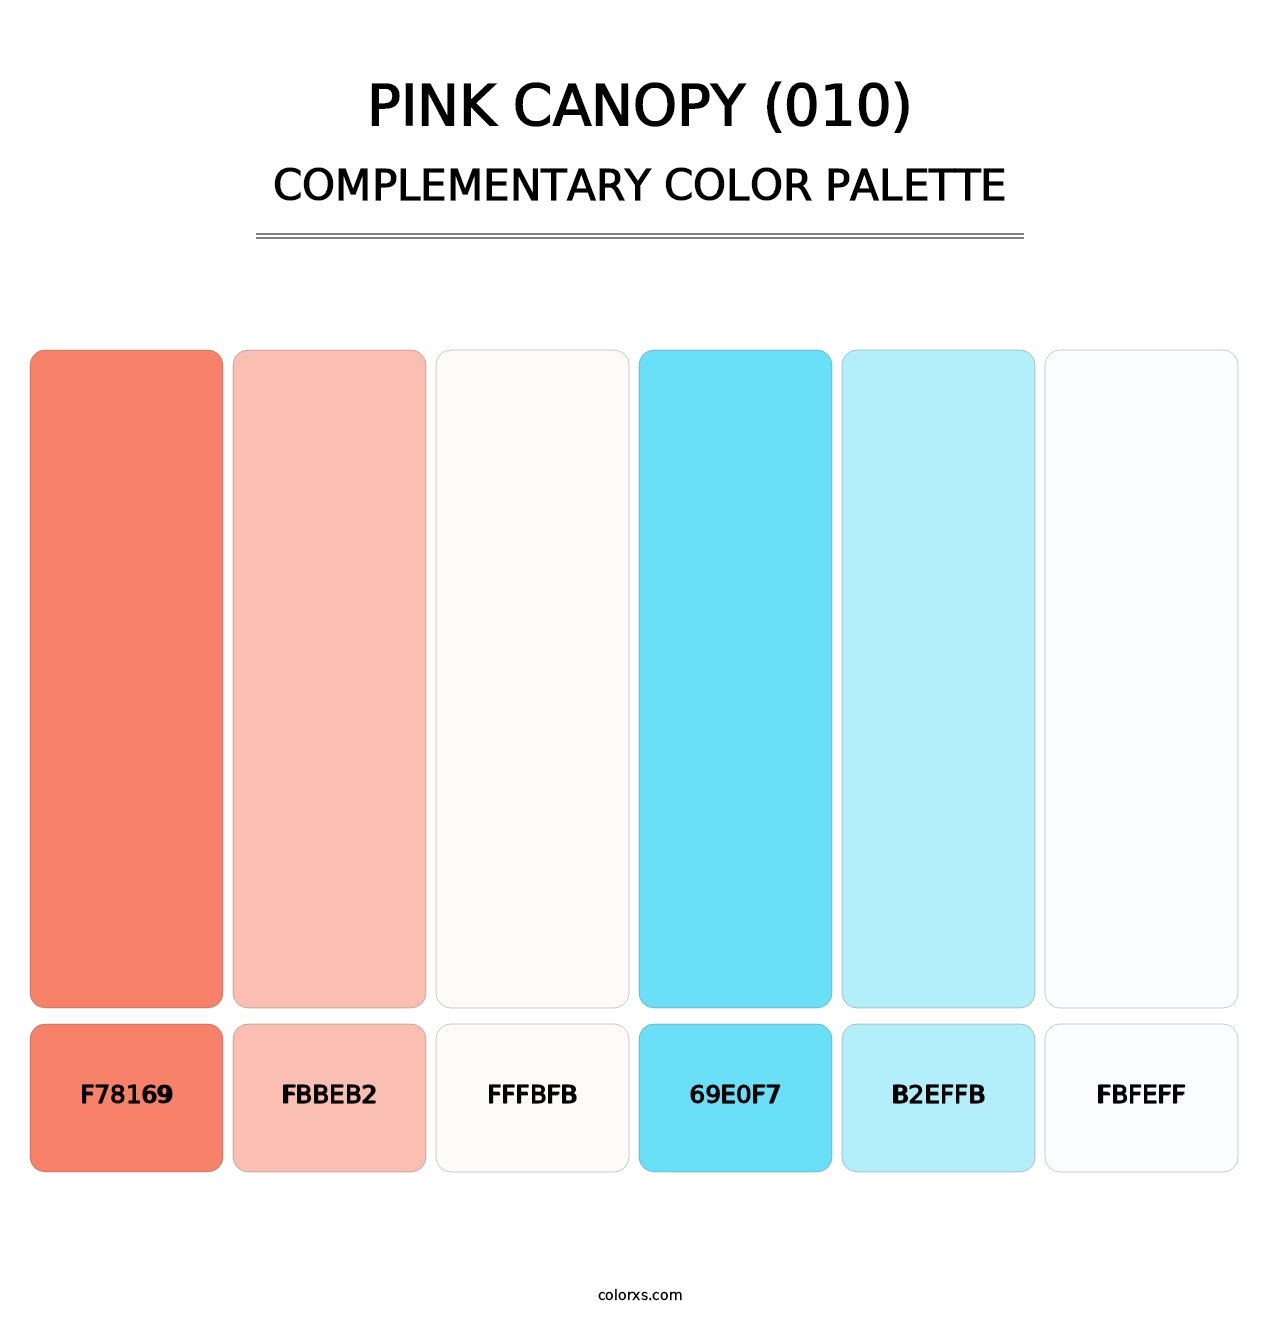 Pink Canopy (010) - Complementary Color Palette